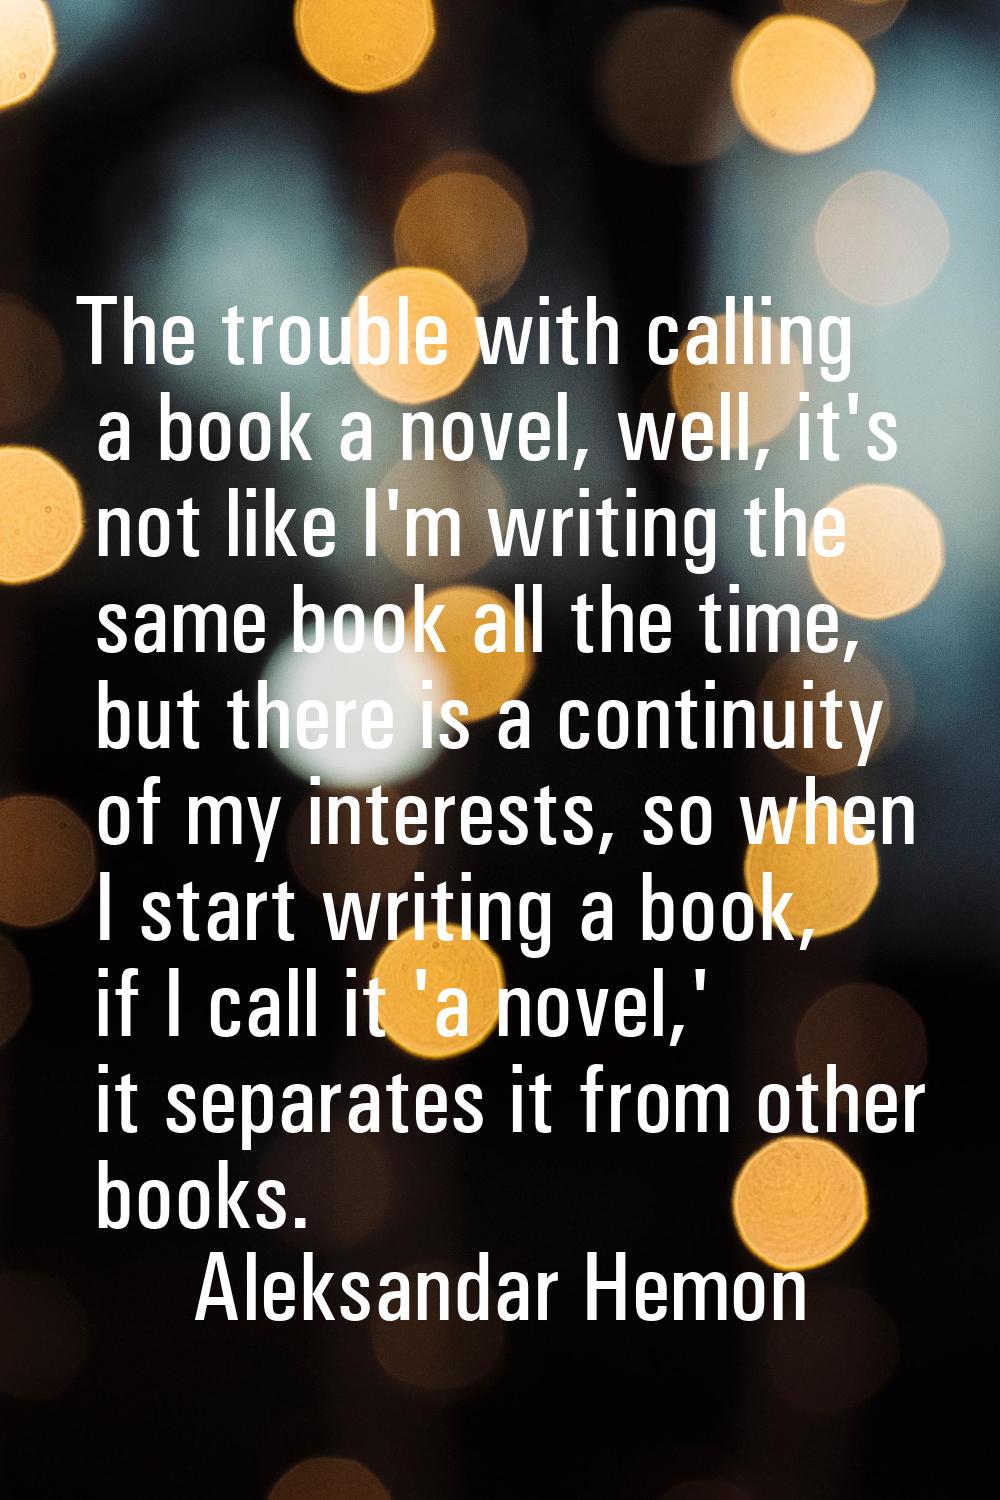 The trouble with calling a book a novel, well, it's not like I'm writing the same book all the time